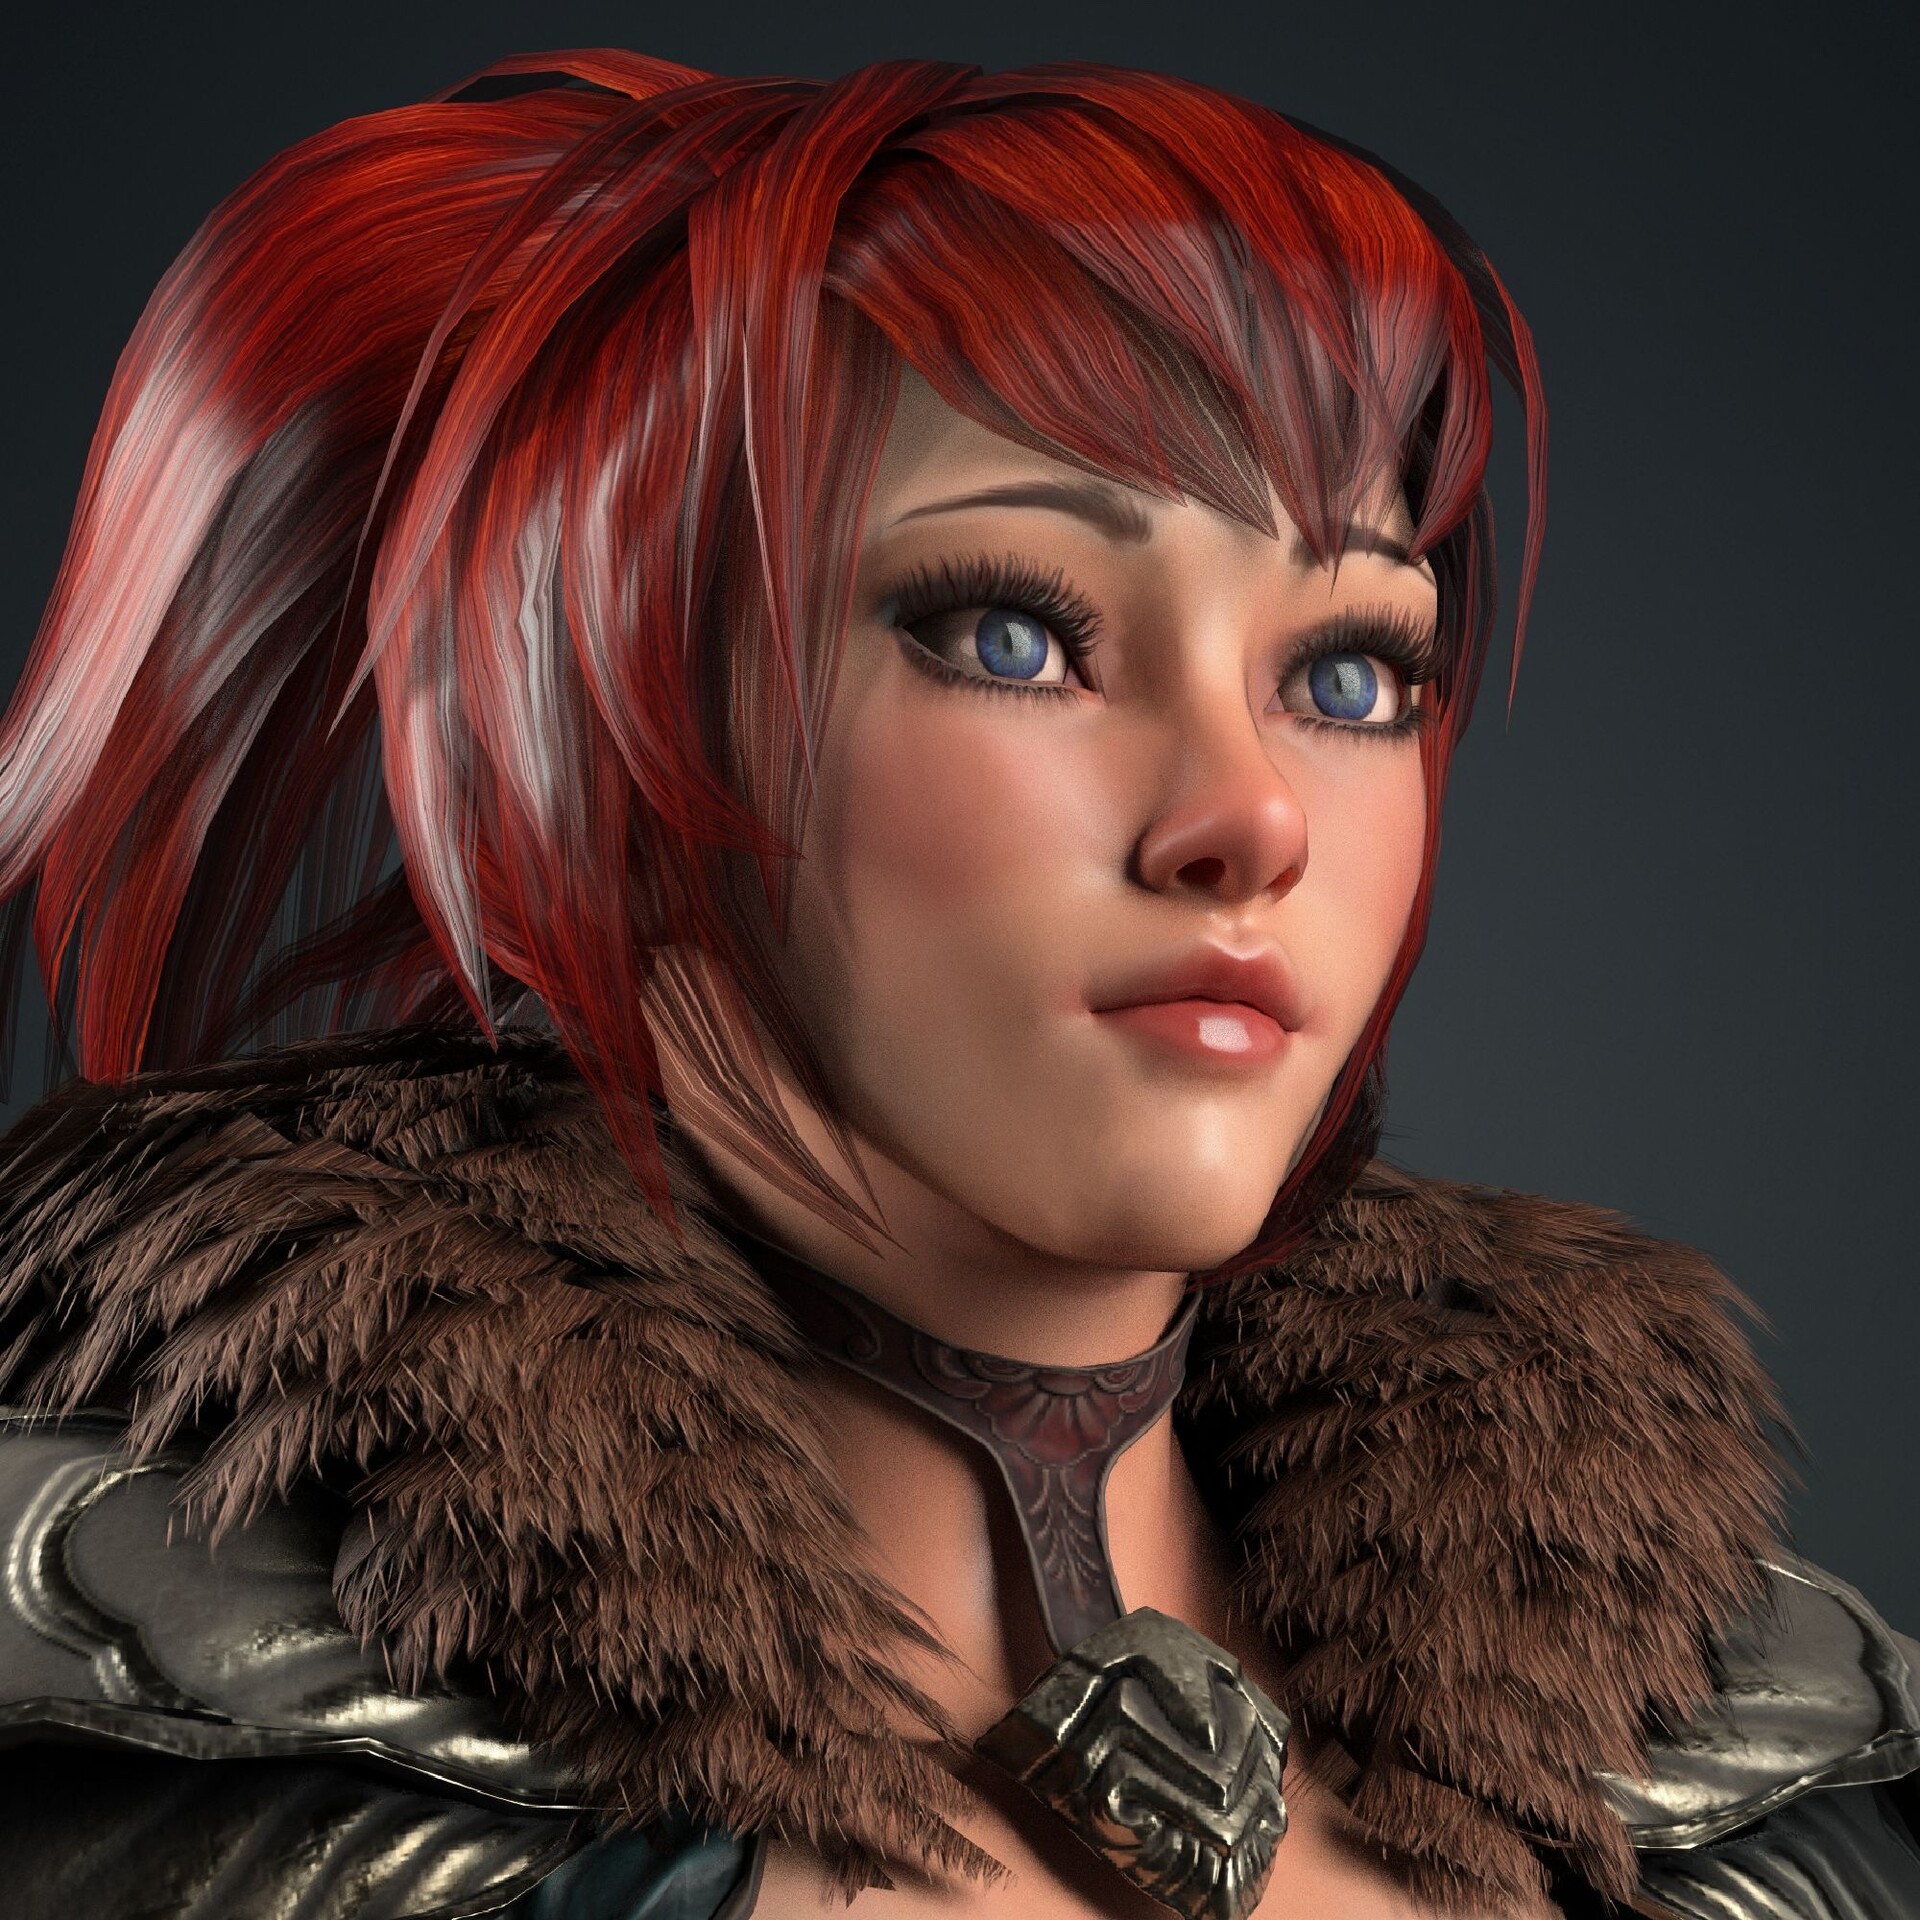 ArtStation - Trish from the Barbarian Tribe